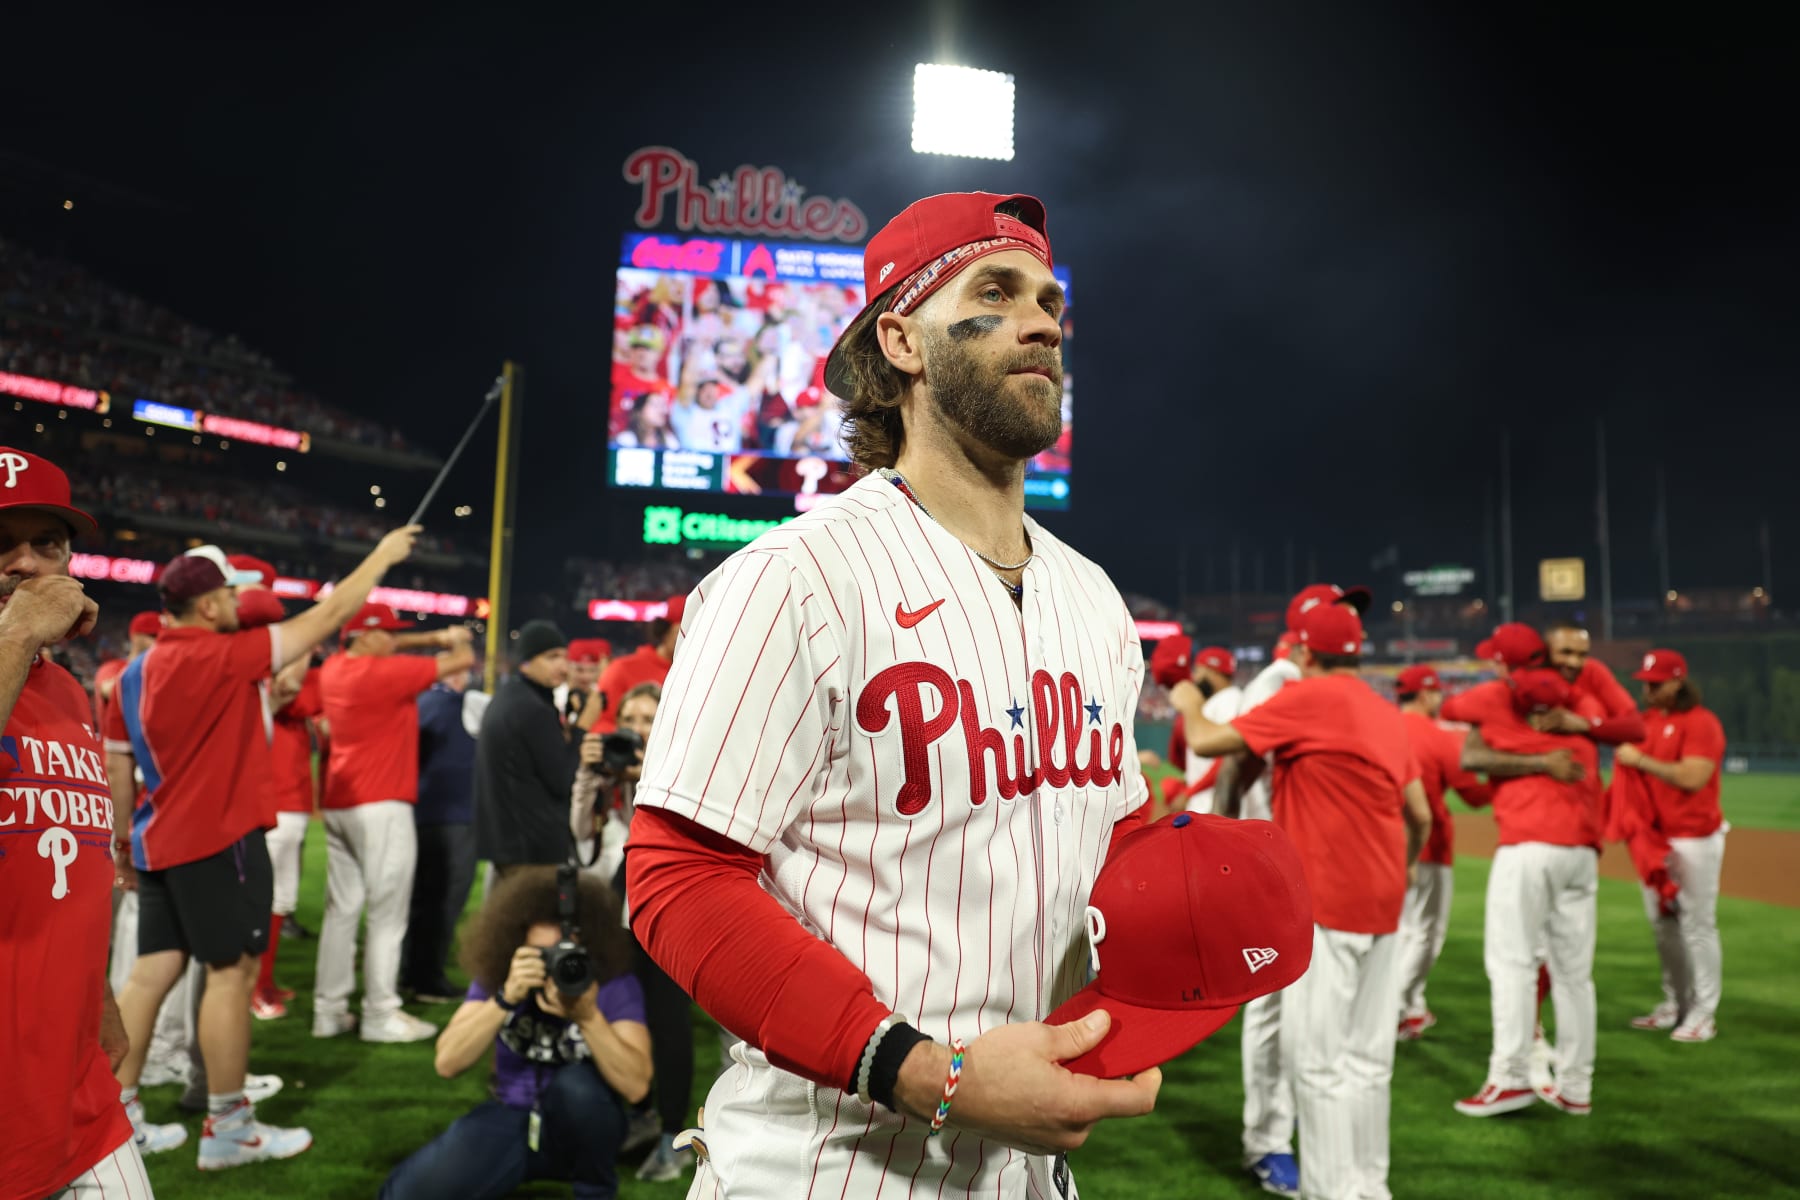 Phillies injury update: Marsh placed on IL, outfield